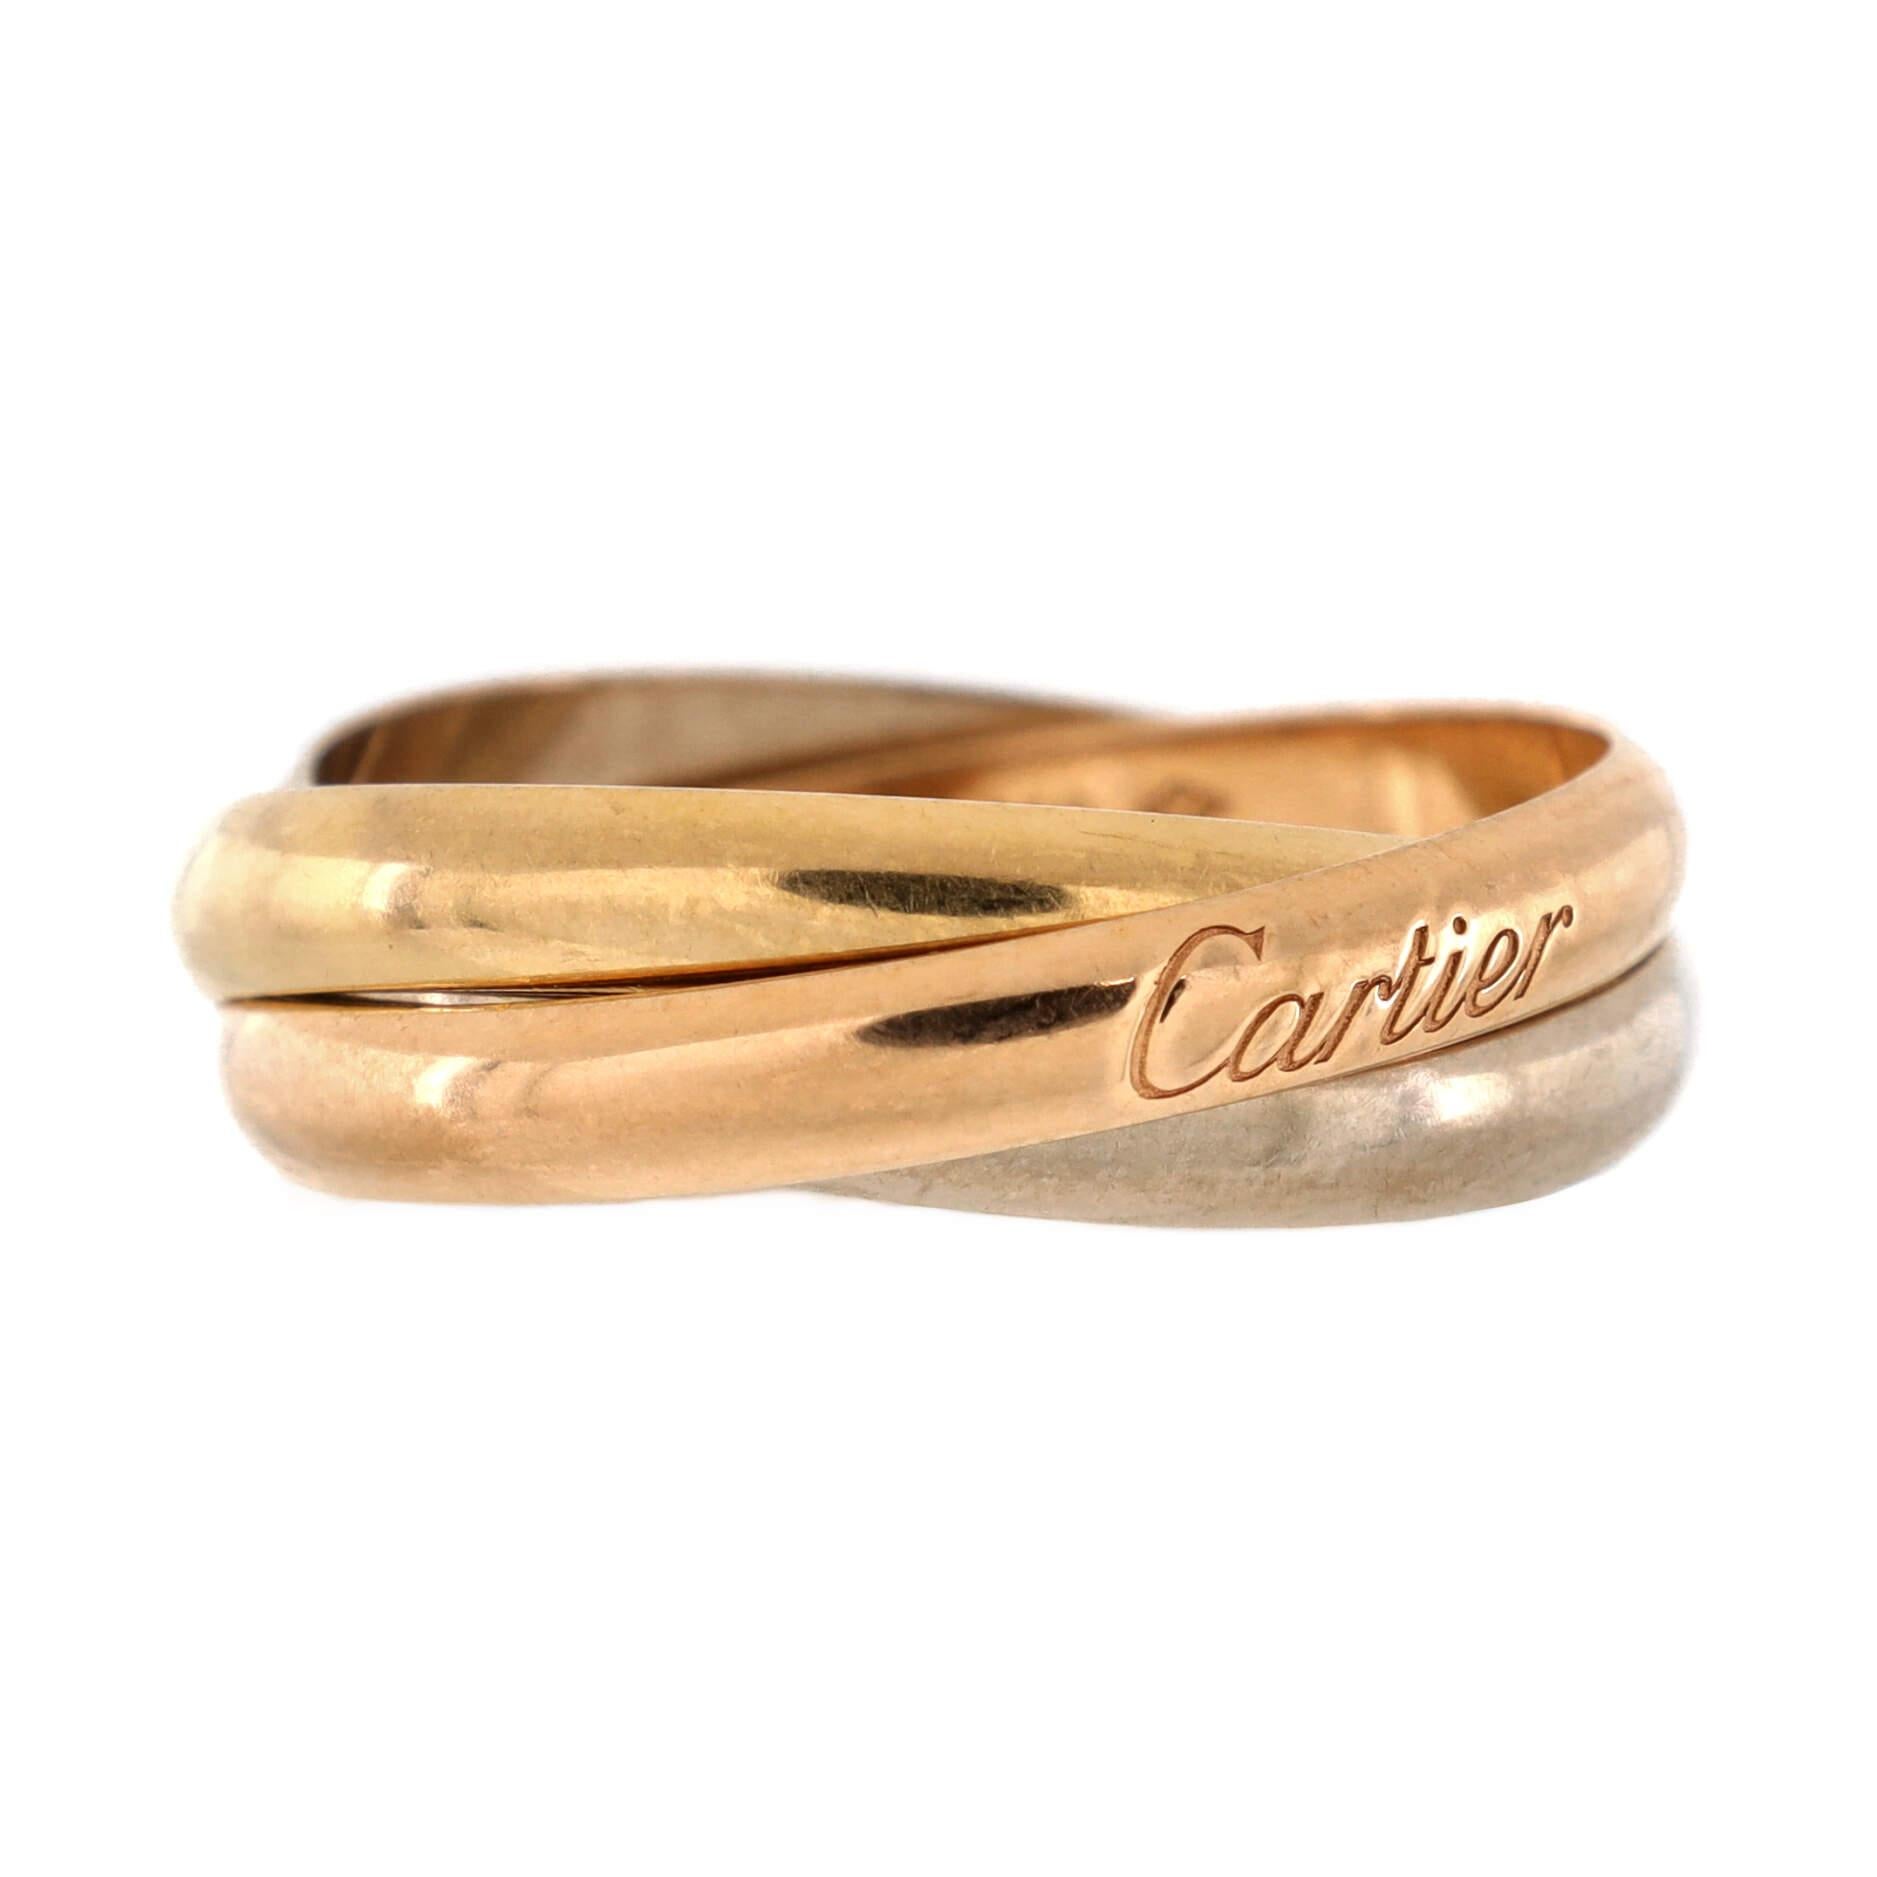 Condition: Good. Moderately heavy wear throughout.
Accessories: No Accessories
Measurements: Size: 7.5 - 56, Width: 2.8 mm
Designer: Cartier
Model: Trinity Ring 18K Tricolor Gold Small
Exterior Color: Tricolor Gold
Item Number: 202637/1